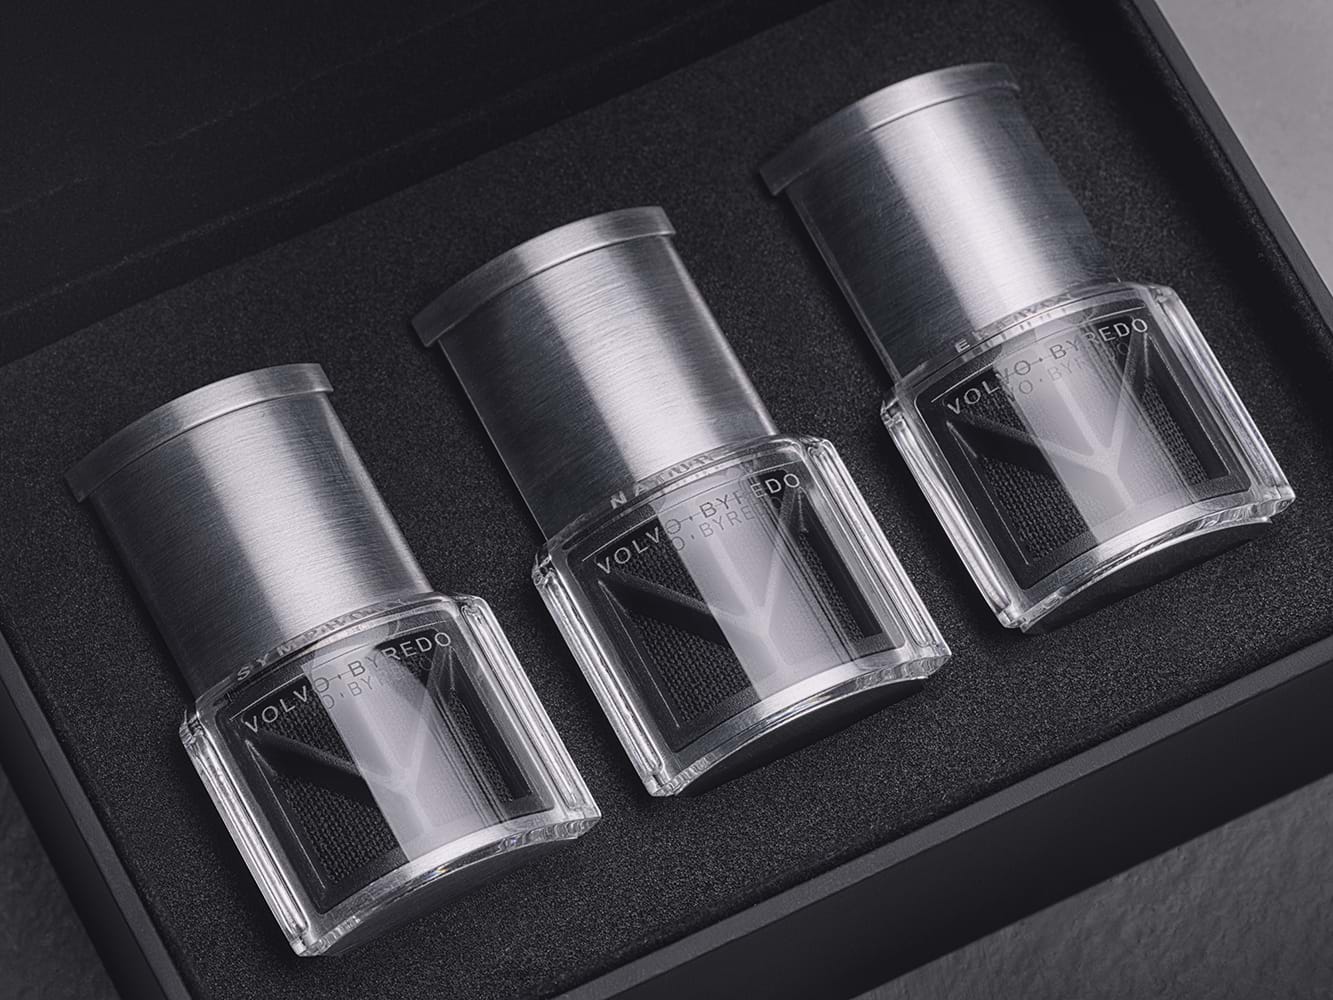 A box containing three small bottles of Byredo scents developed for the Volvo Ambience Interior concept